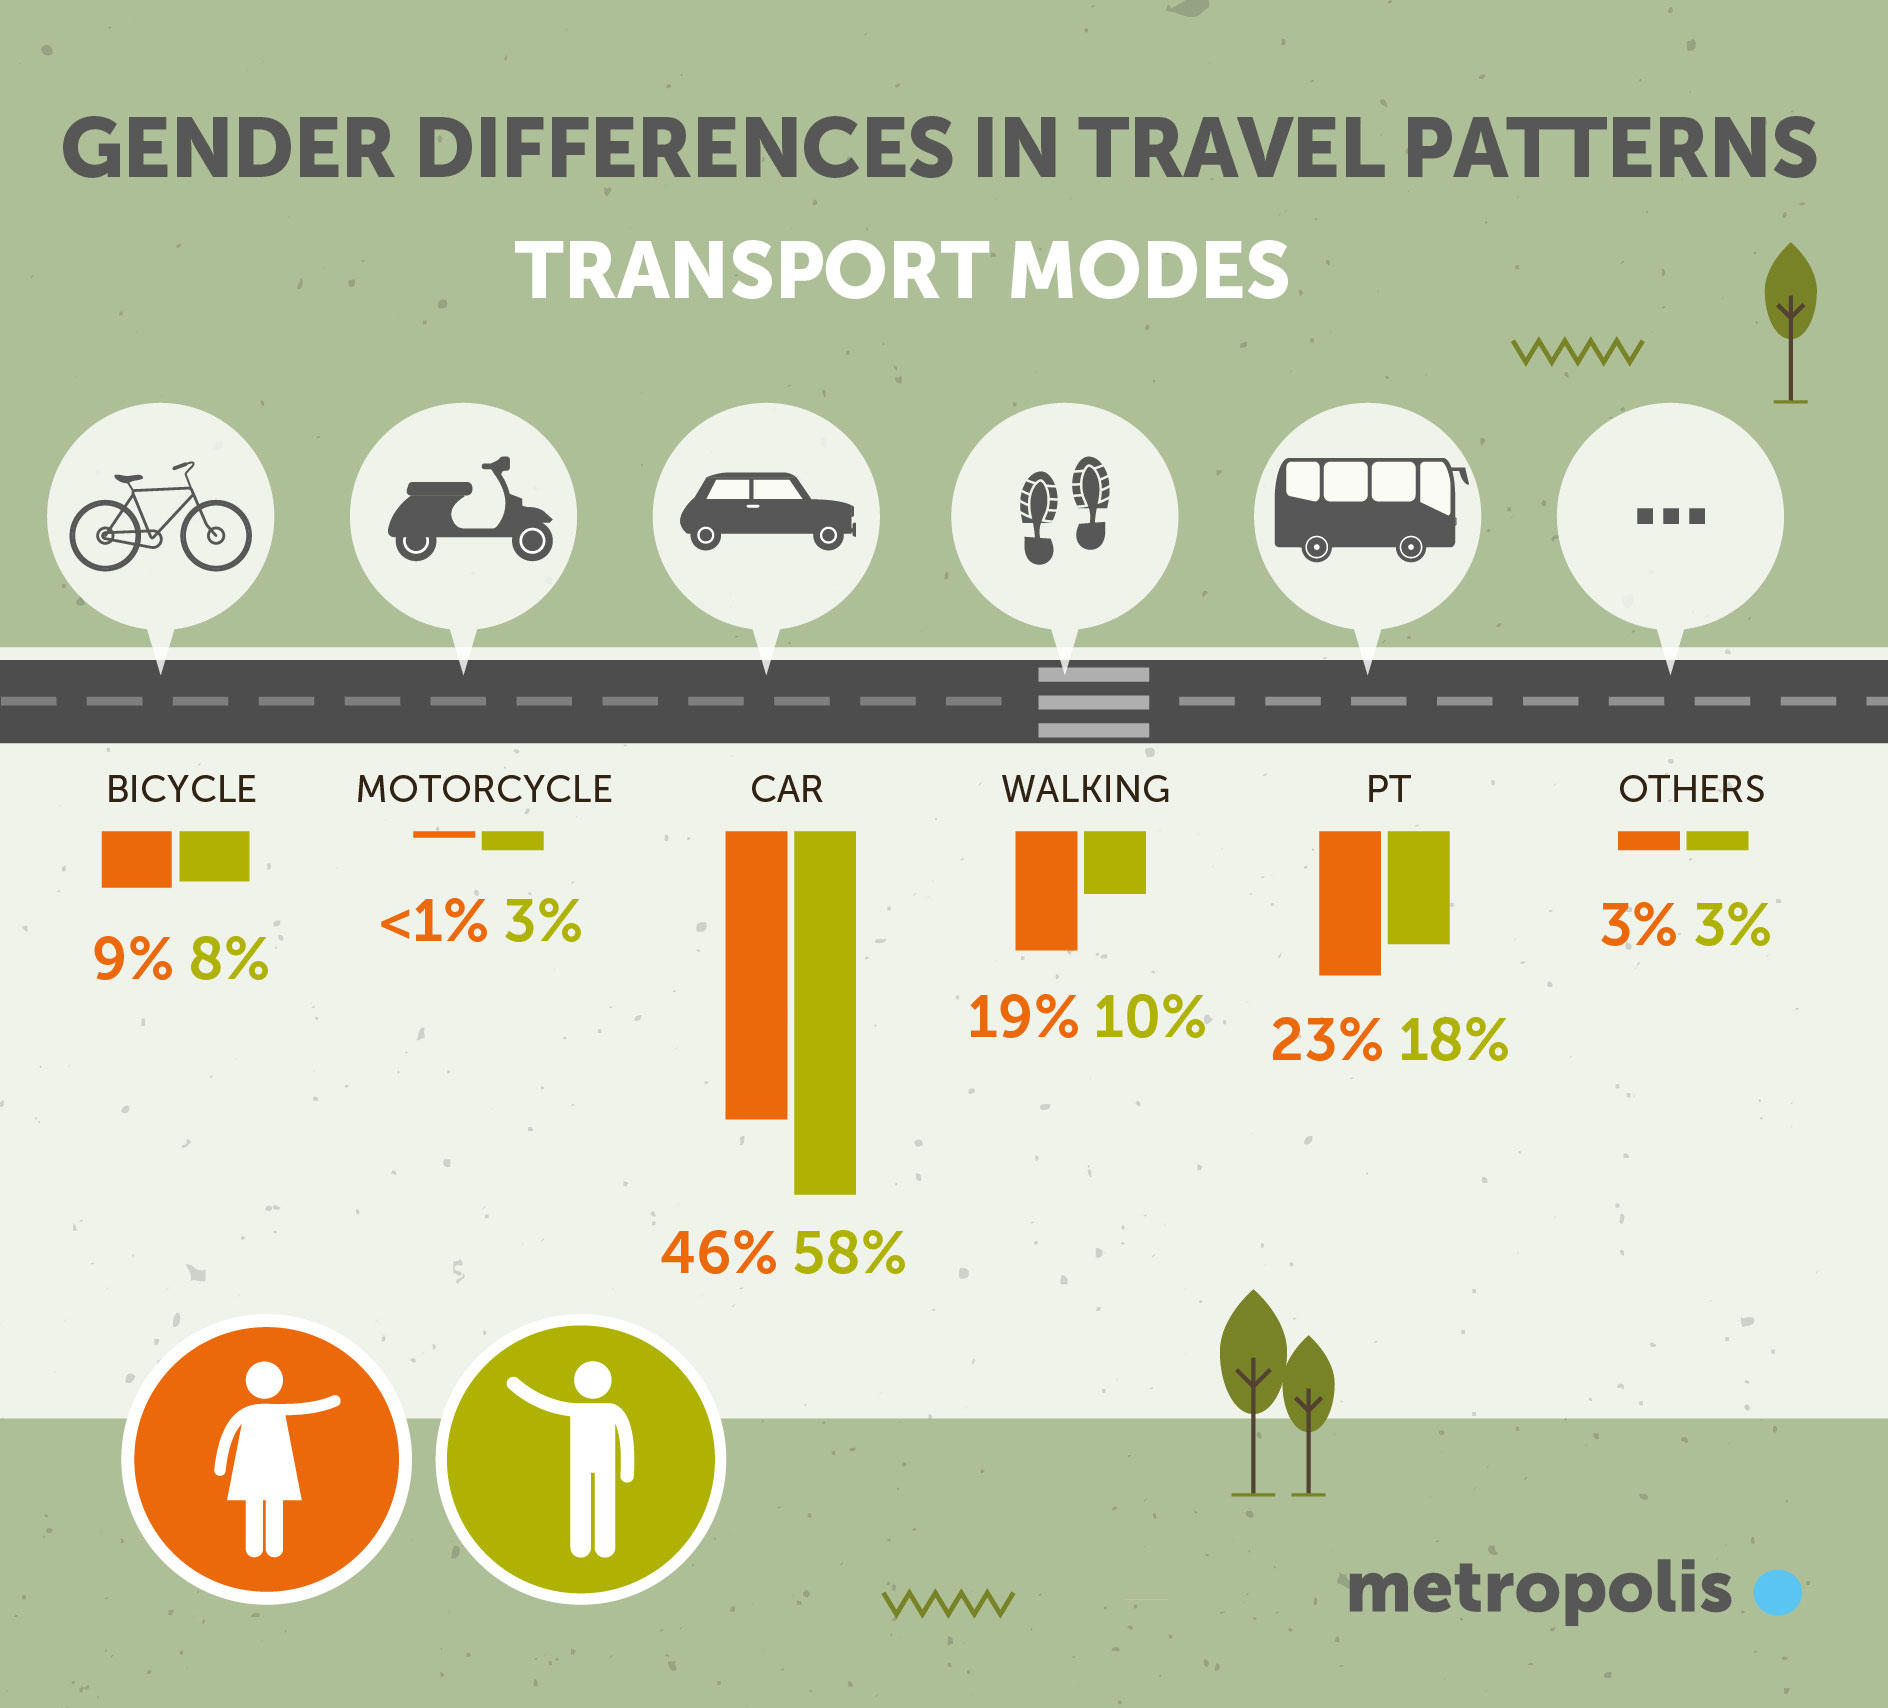 Gender differences in travel patterns